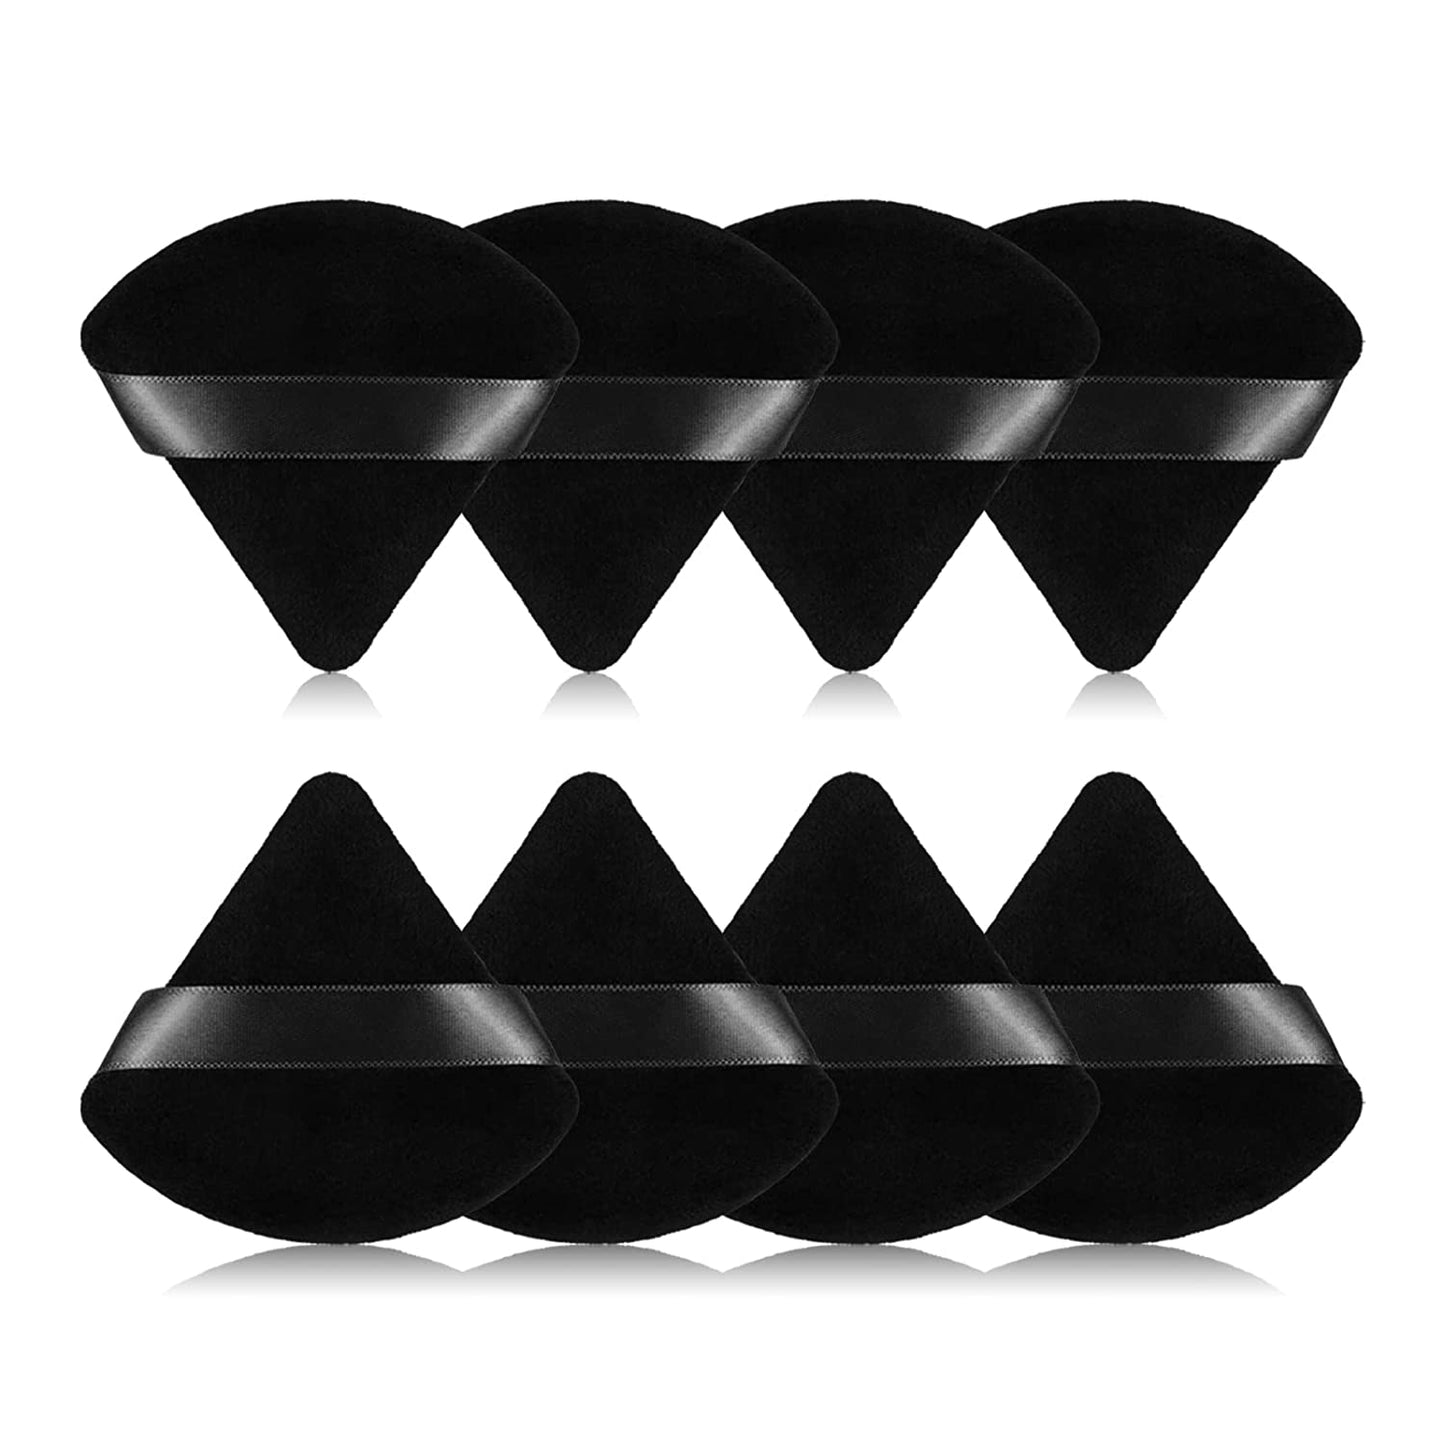 8Pcs of Triangular Powder Puff Makeup Sponges, Made of Super-Soft Velvet, Designed for Contouring, Eye, and Corner, Beauty Blender Foundation Mixing Container.(Black)